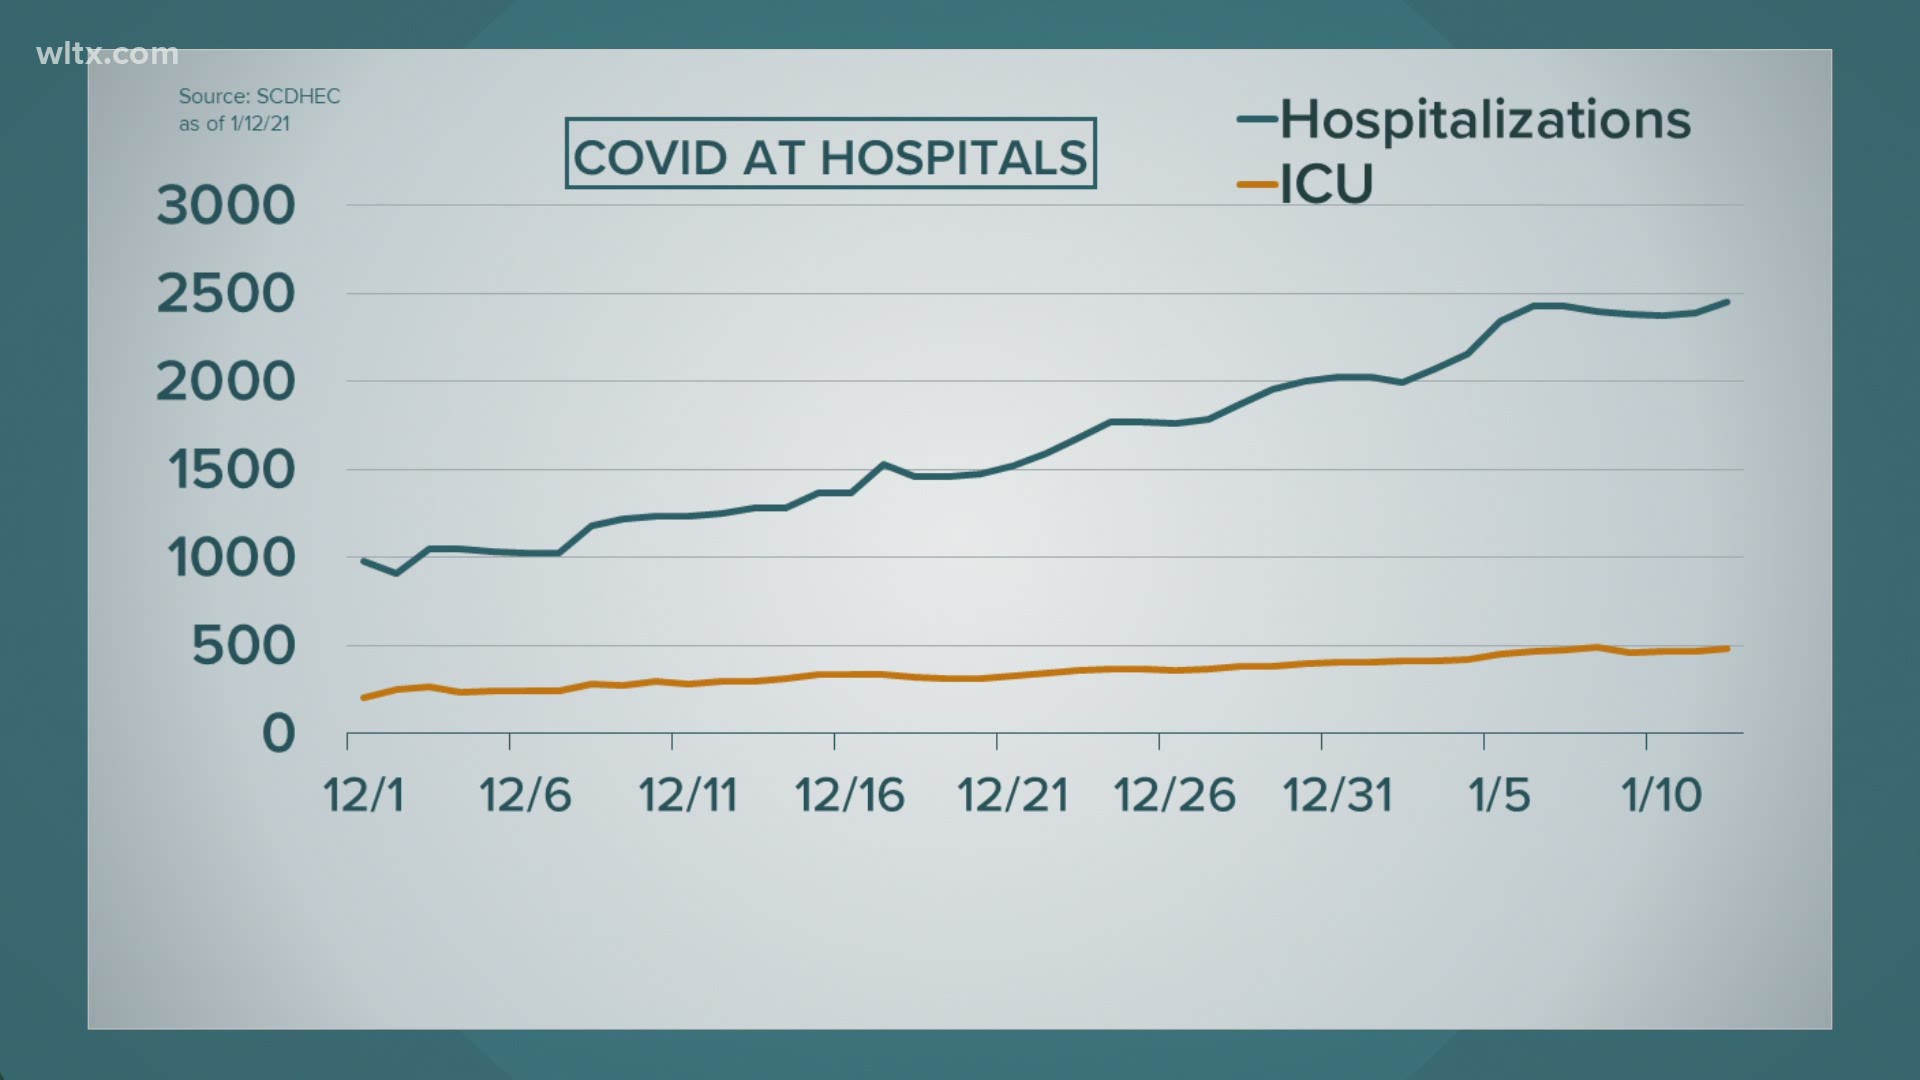 The number of hospitalizations due to COVID-19 hit another record high as 2,453 new patients were reported on Tuesday, Jan. 12.